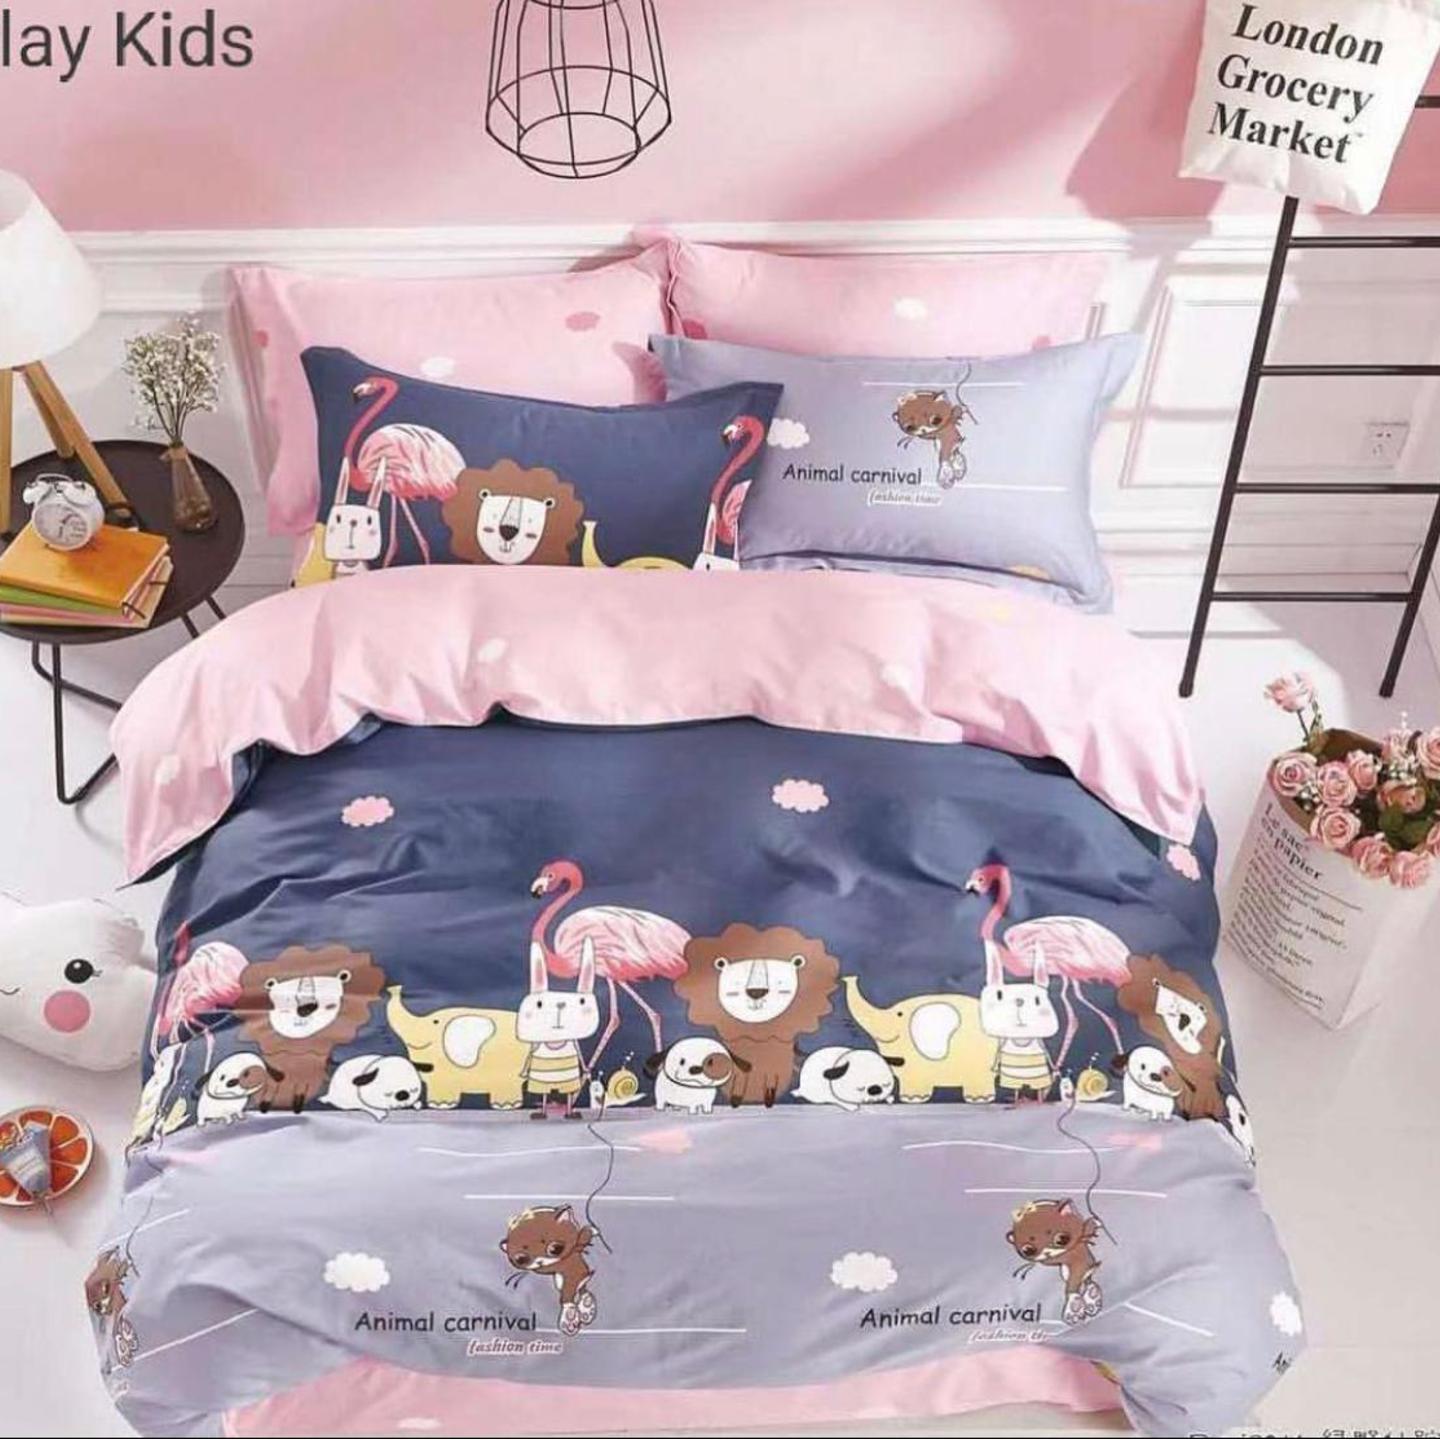 Handtex Home Glace Cotton Cartoon Printed Bedsheet with 2 Pillow Cover for Kids 90x100 Inch